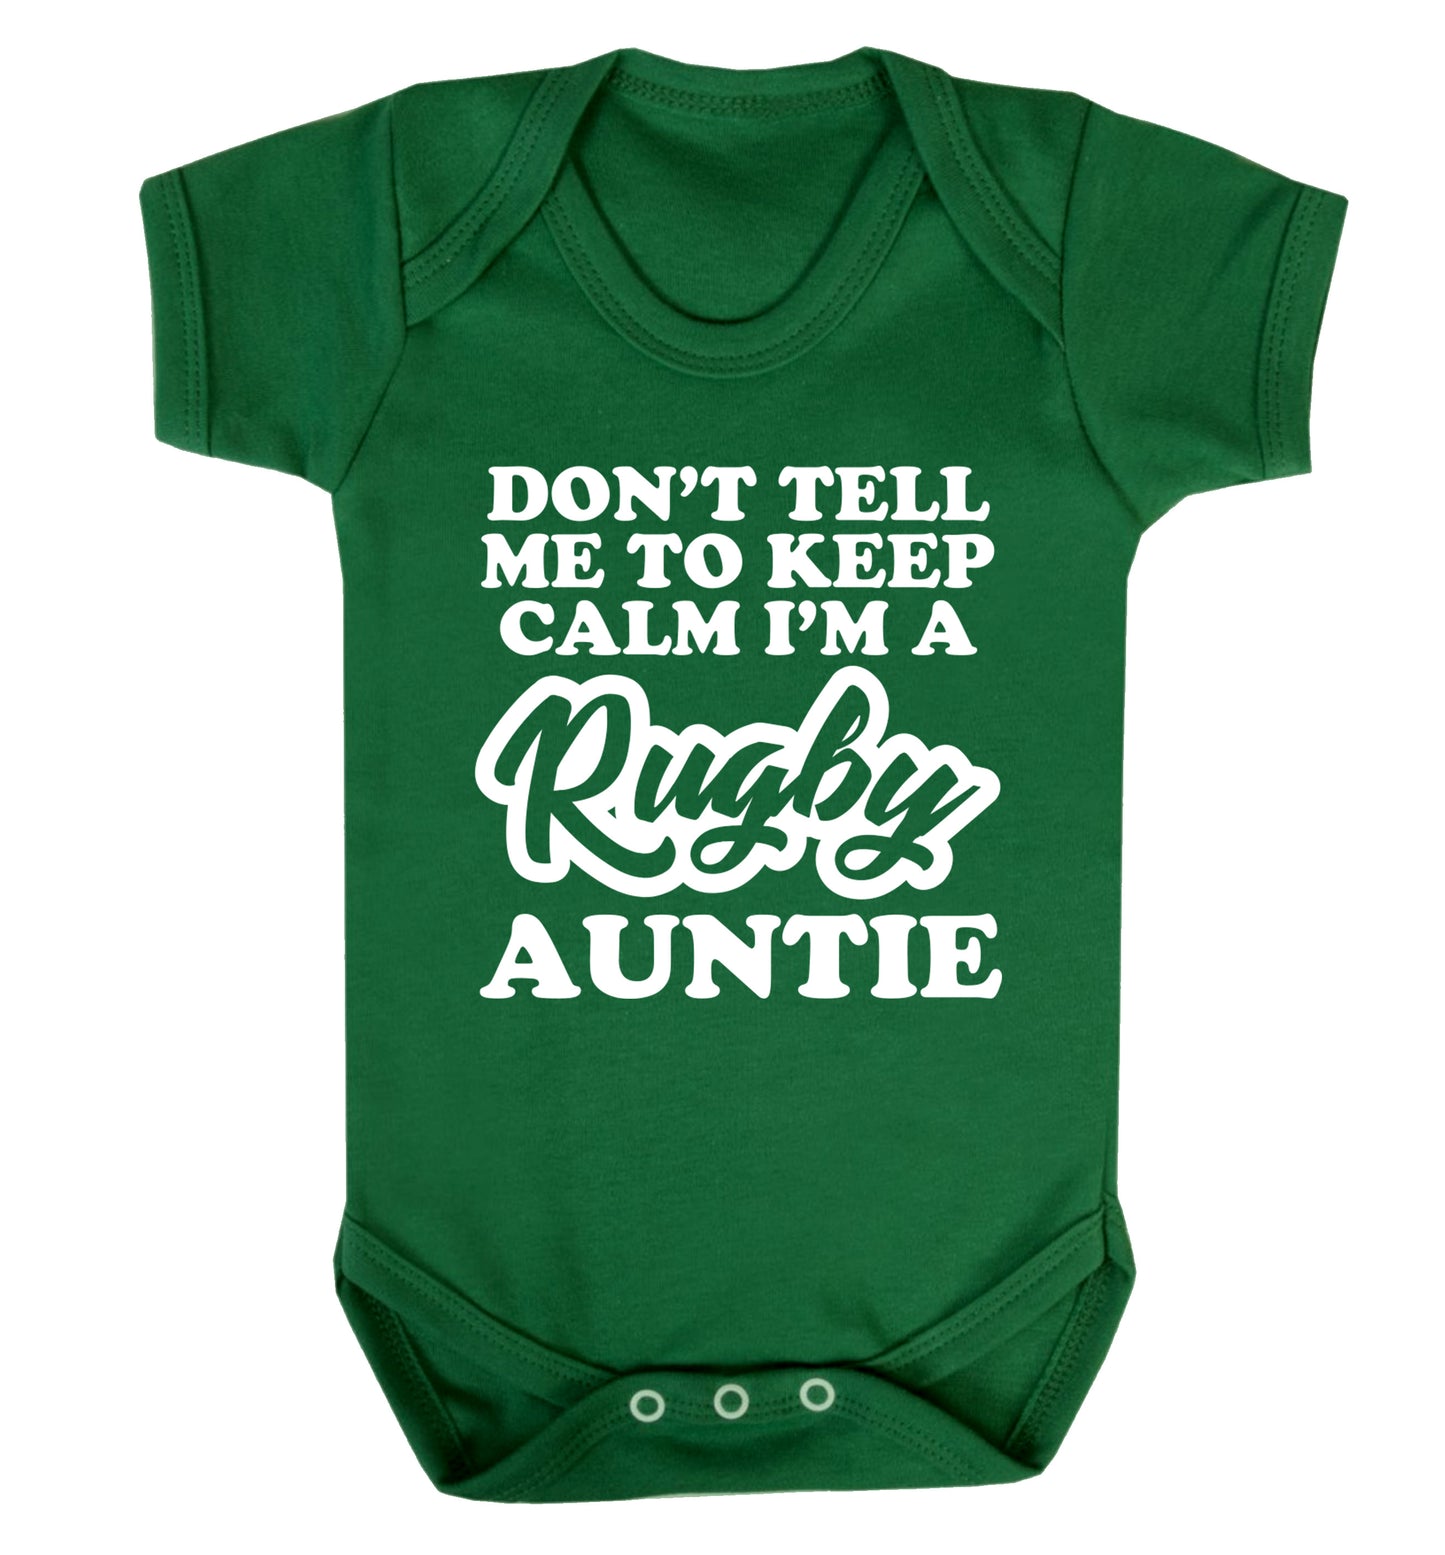 Don't tell me keep calm I'm a rugby auntie Baby Vest green 18-24 months